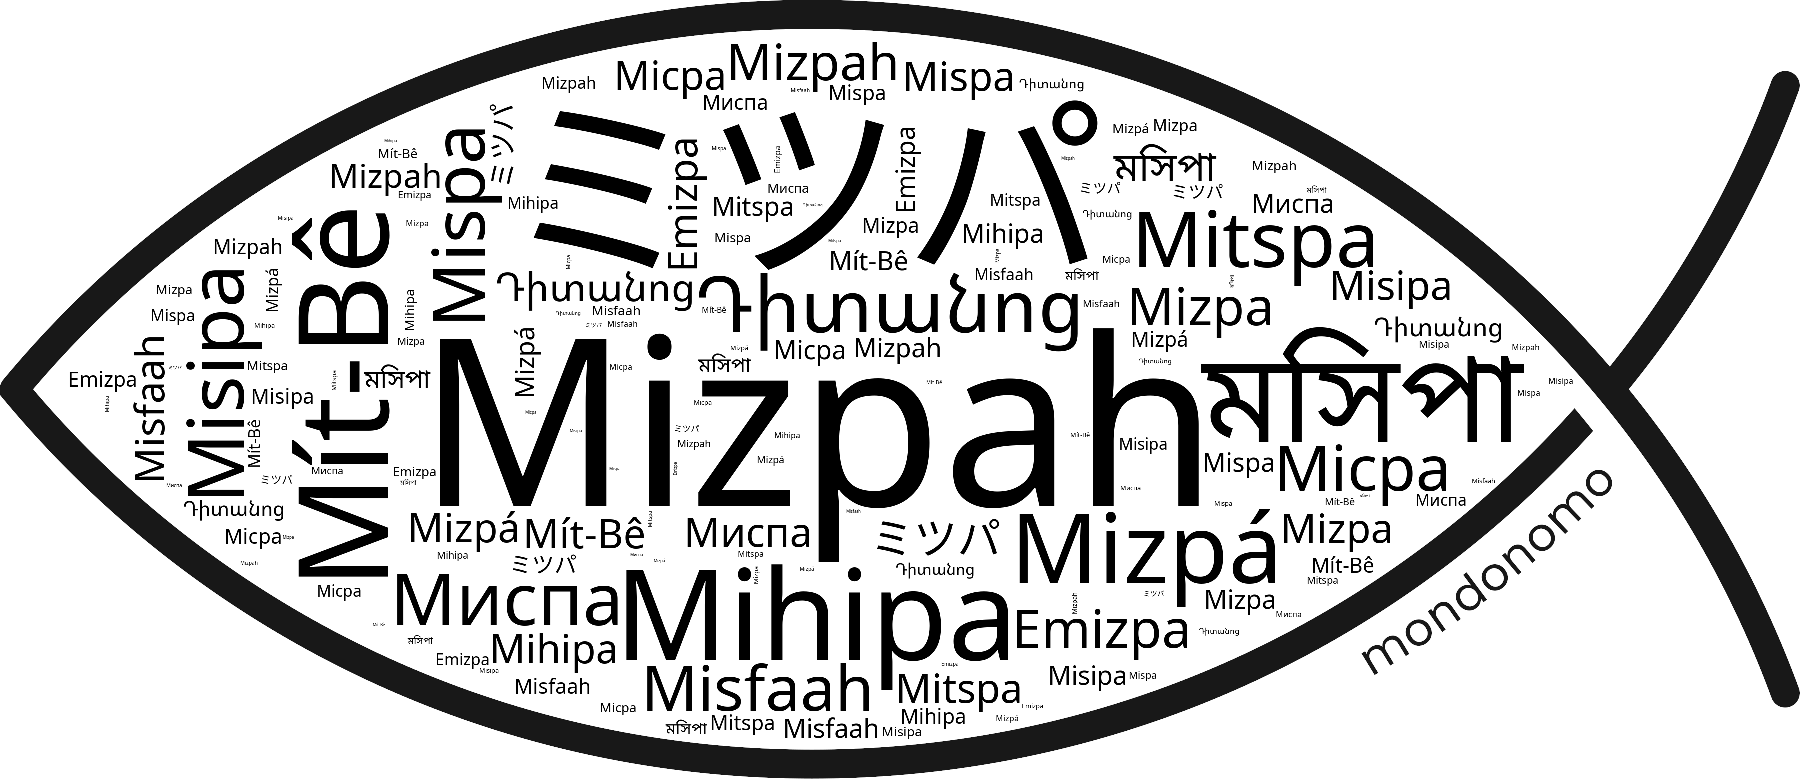 Name Mizpah in the world's Bibles